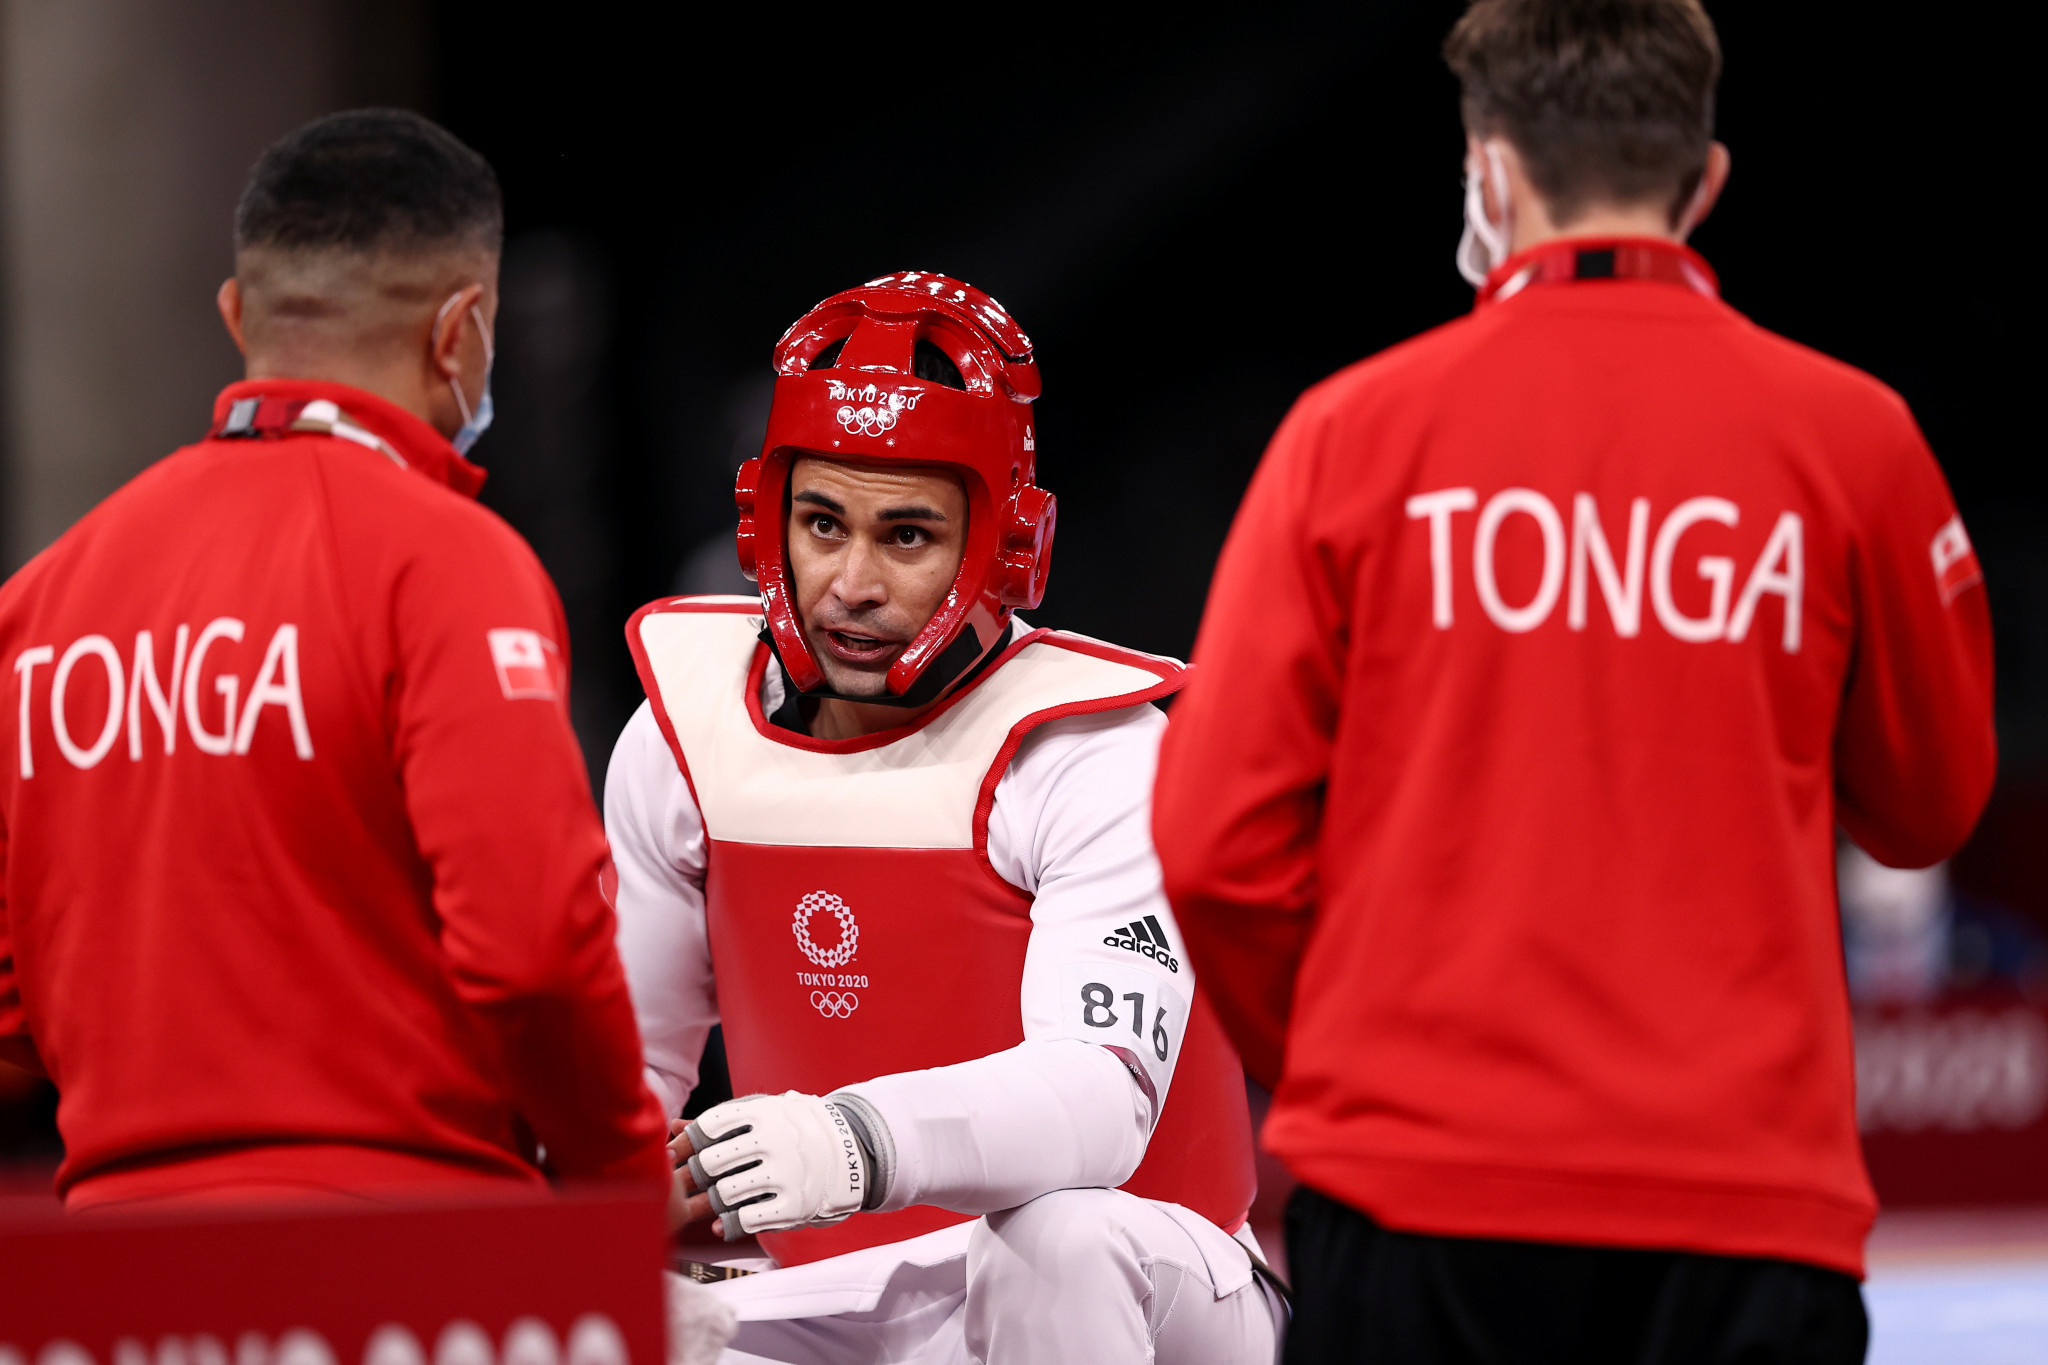 Pita Taufatofua (center) during the Men's +80kg Taekwondo Repechage contest on day four of the Tokyo 2020 Olympic Games Maja Hitij/Getty Images